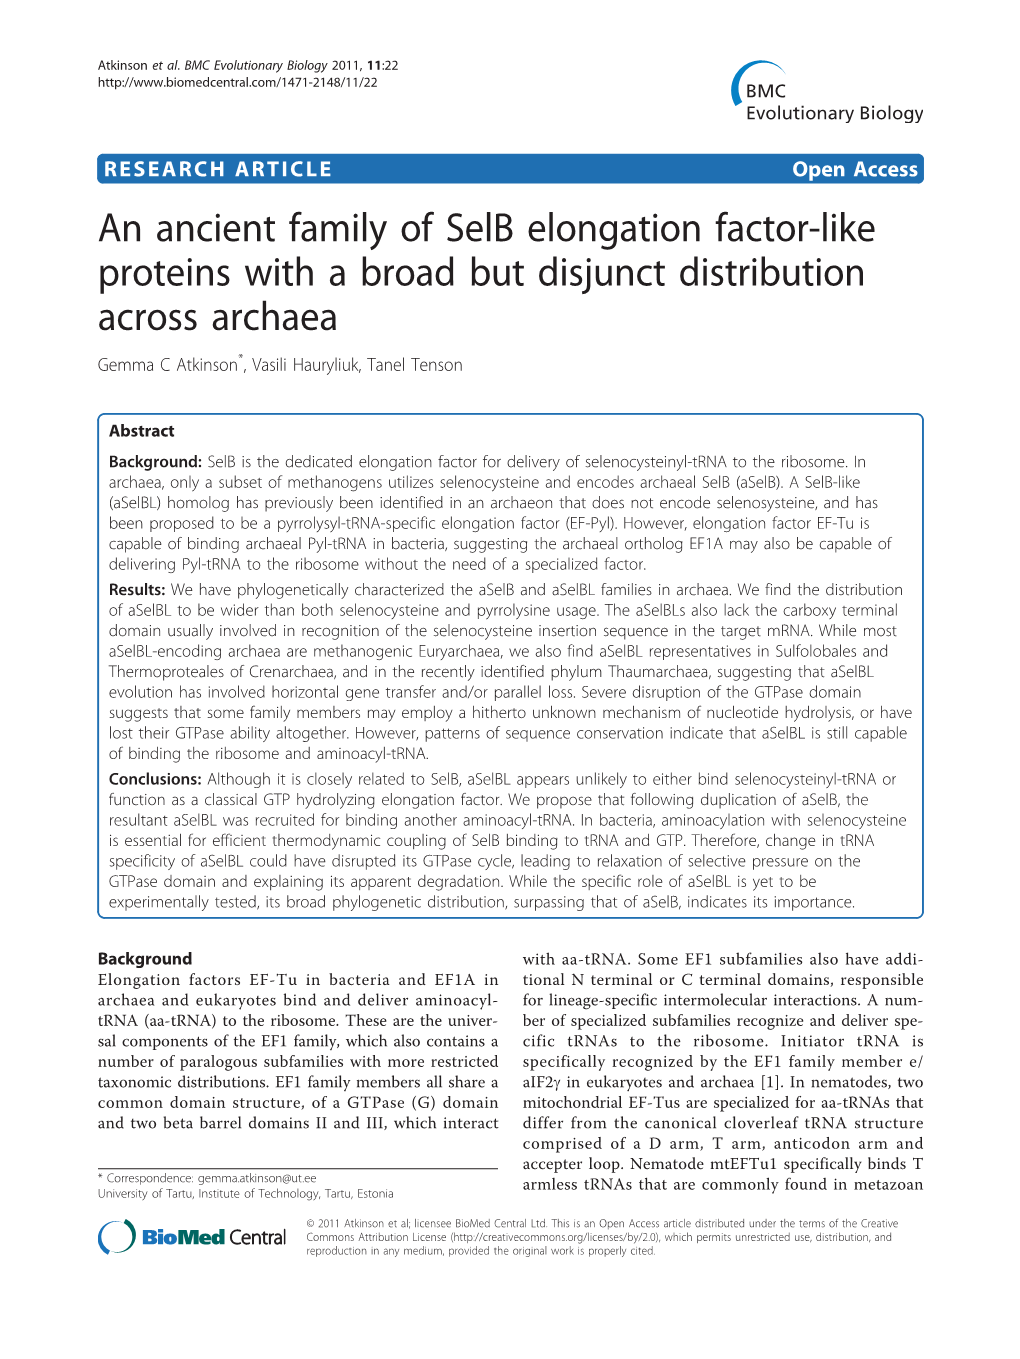 An Ancient Family of Selb Elongation Factor-Like Proteins with a Broad but Disjunct Distribution Across Archaea Gemma C Atkinson*, Vasili Hauryliuk, Tanel Tenson